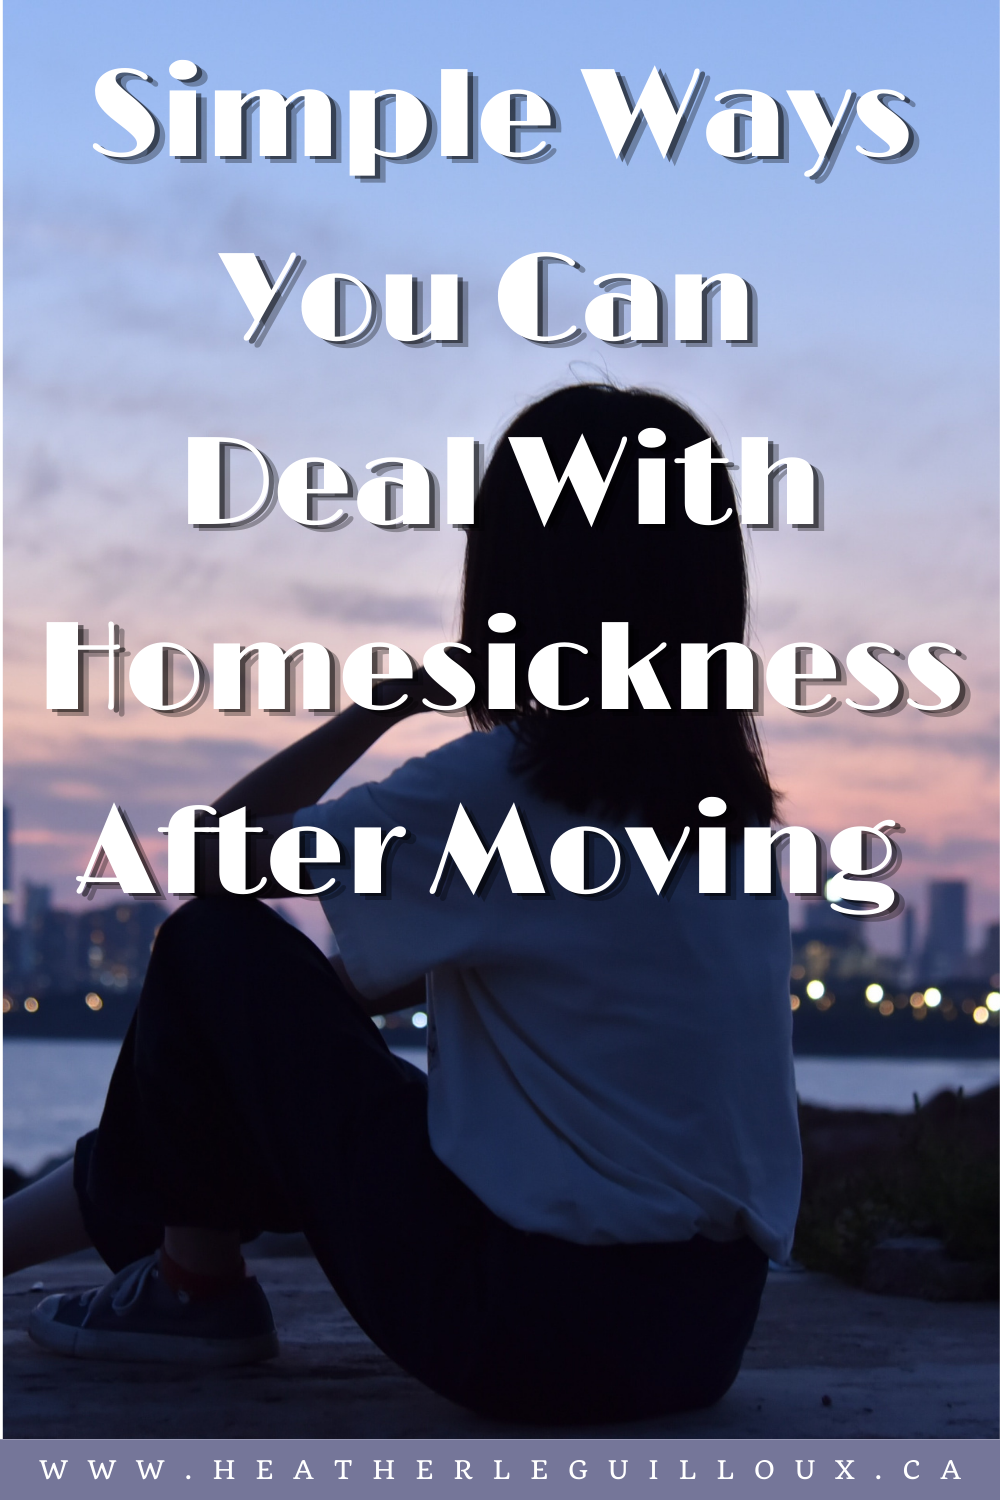 This suggestion guide can help you battle feelings of homesickness while helping you create a new life in a new place that you’re excited to write home about. #homesick #emotions #healthy #connection